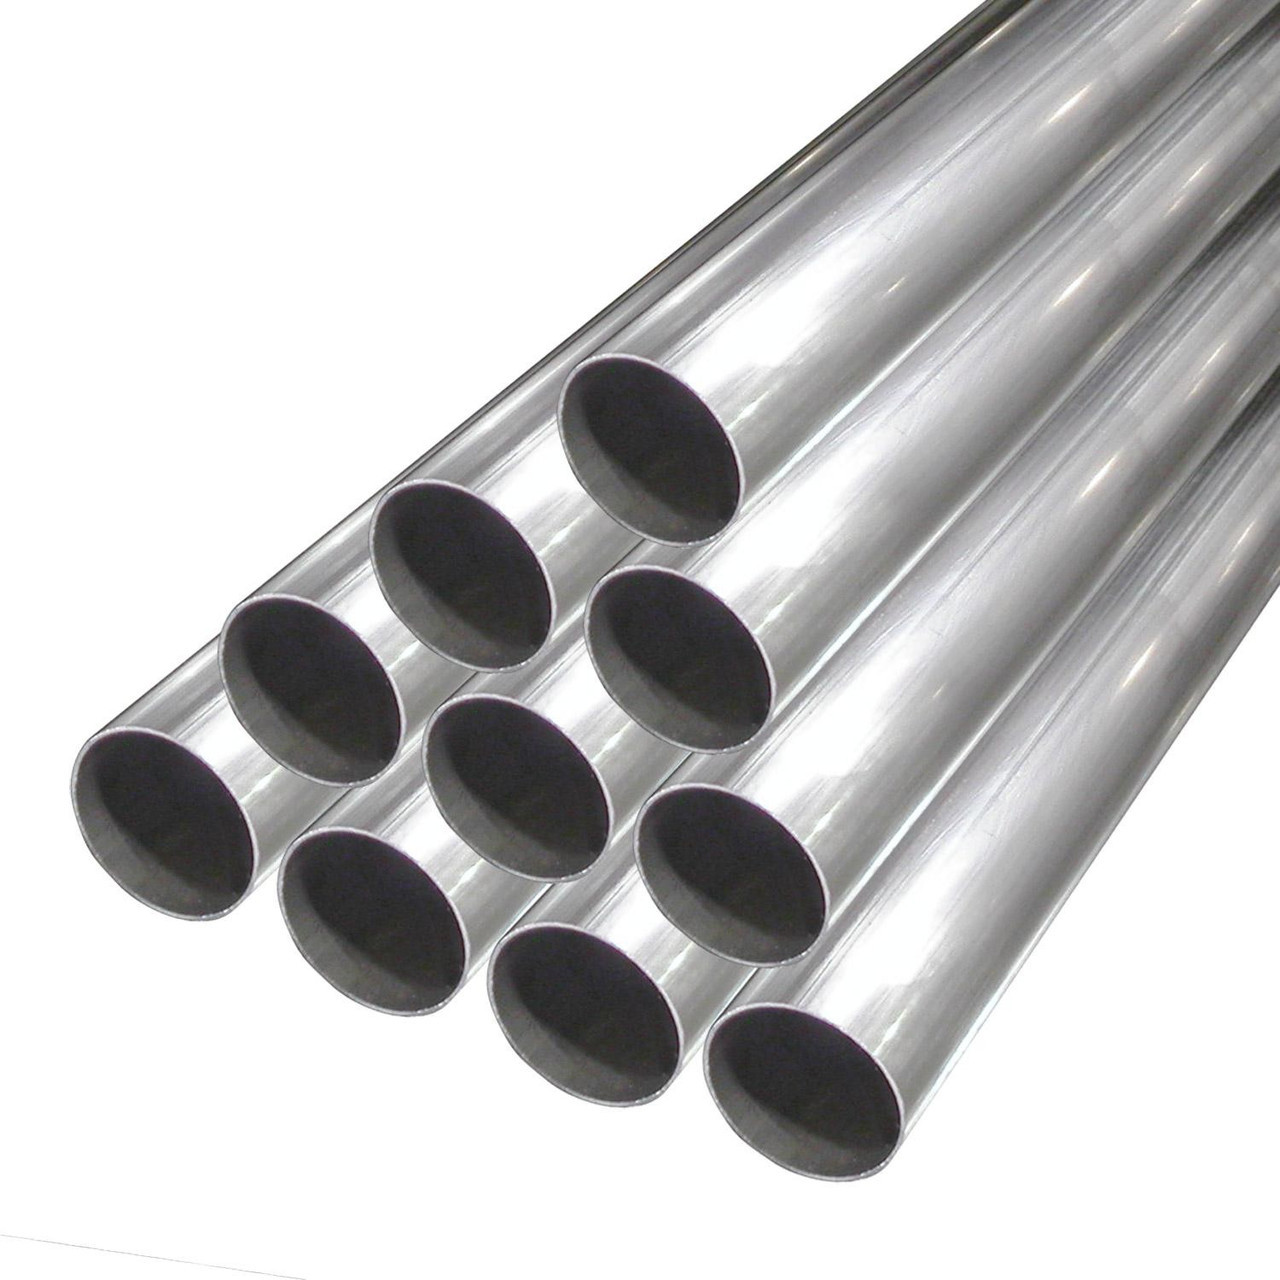 Stainless Works 1.8SS-1 Exhaust Pipe, Straight, 1-7/8 in Diameter, 12 in Long, 0.065 Wall, Stainless, Natural, Each